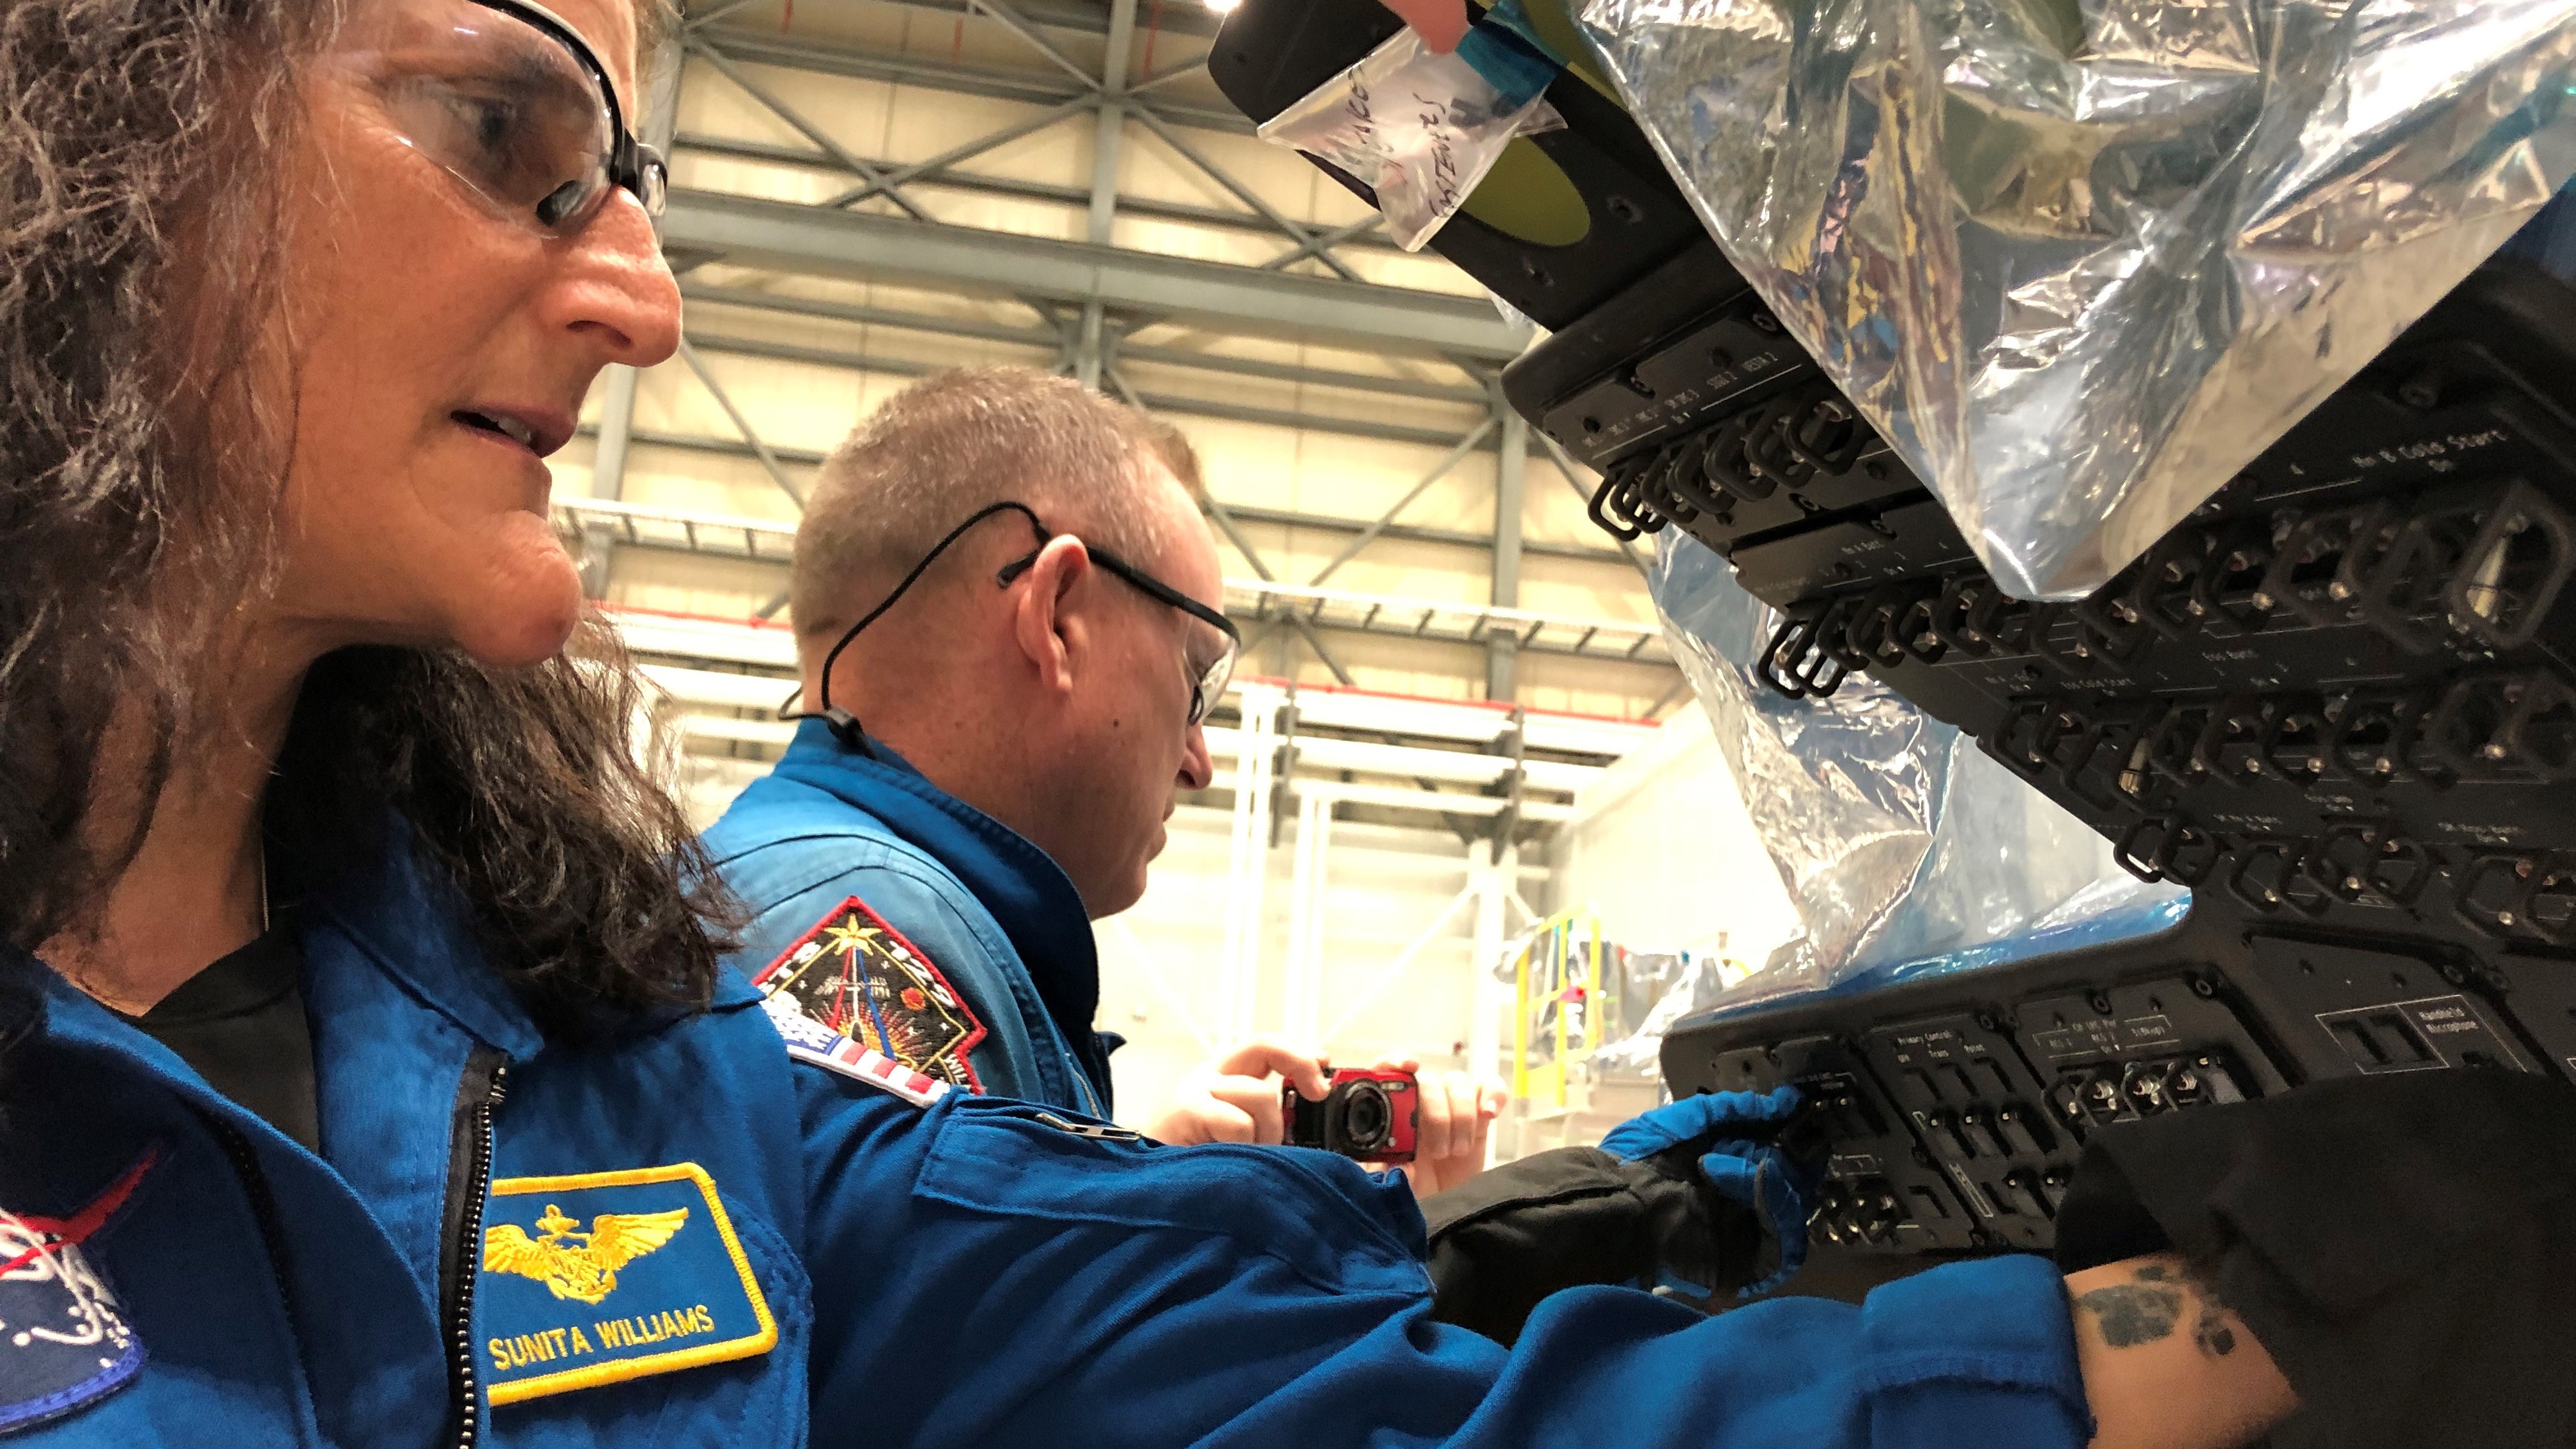 two people in blue flight suits touch control panels in an open spacecraft cockpit in a hangar